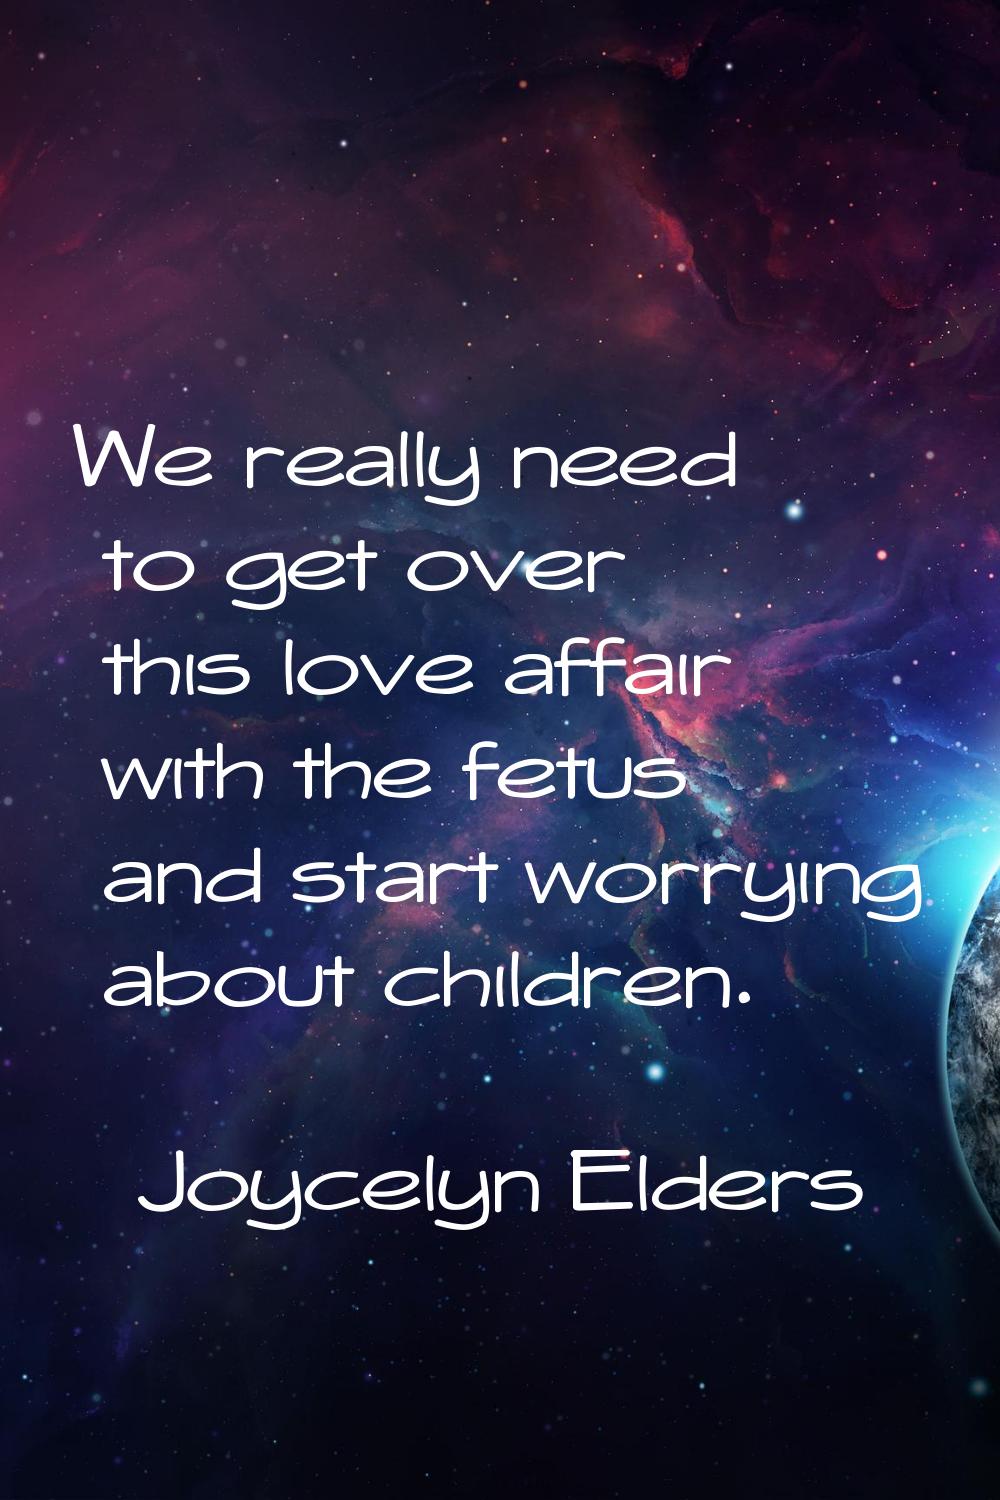 We really need to get over this love affair with the fetus and start worrying about children.